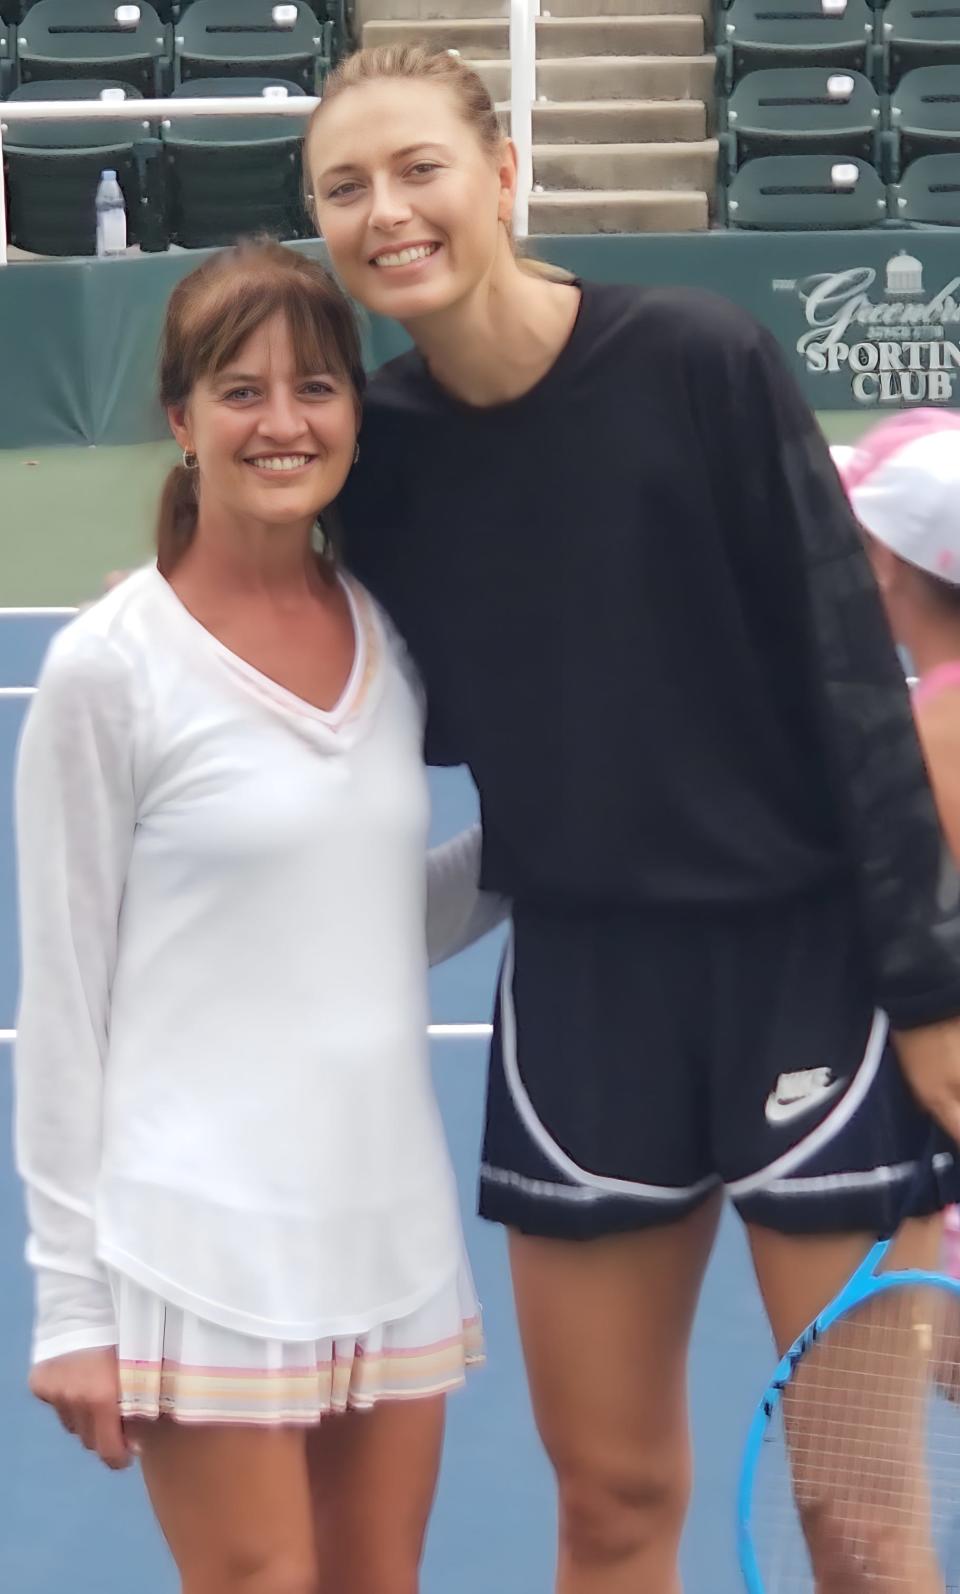 Tammy Simone, who has a record seven women’s singles titles in the News Journal Tennis Tournament, with tennis great Maria Sharapova.